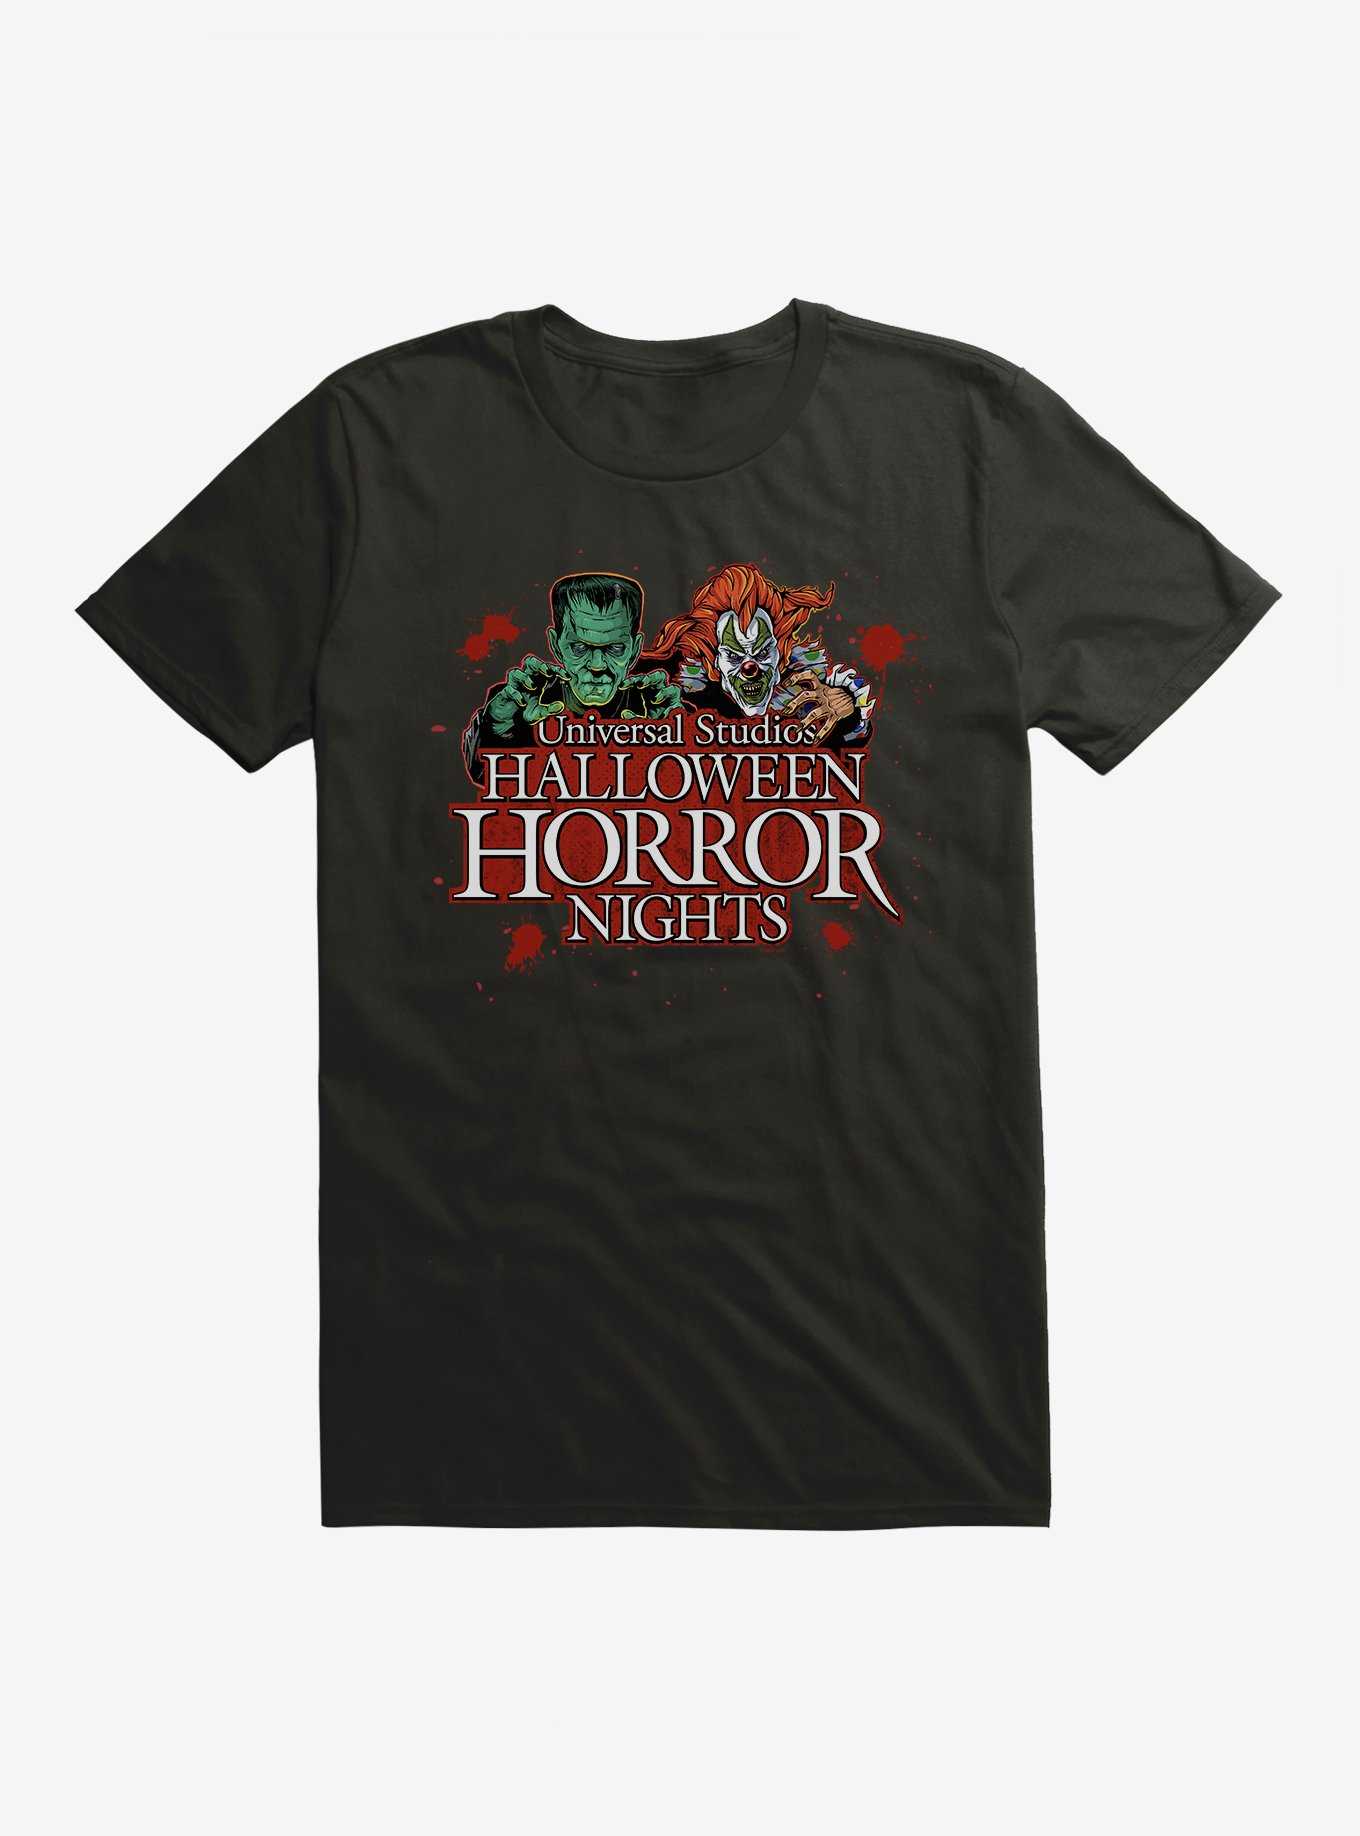 OFFICIAL Universal Monsters Shirts, Hoodies & Merch